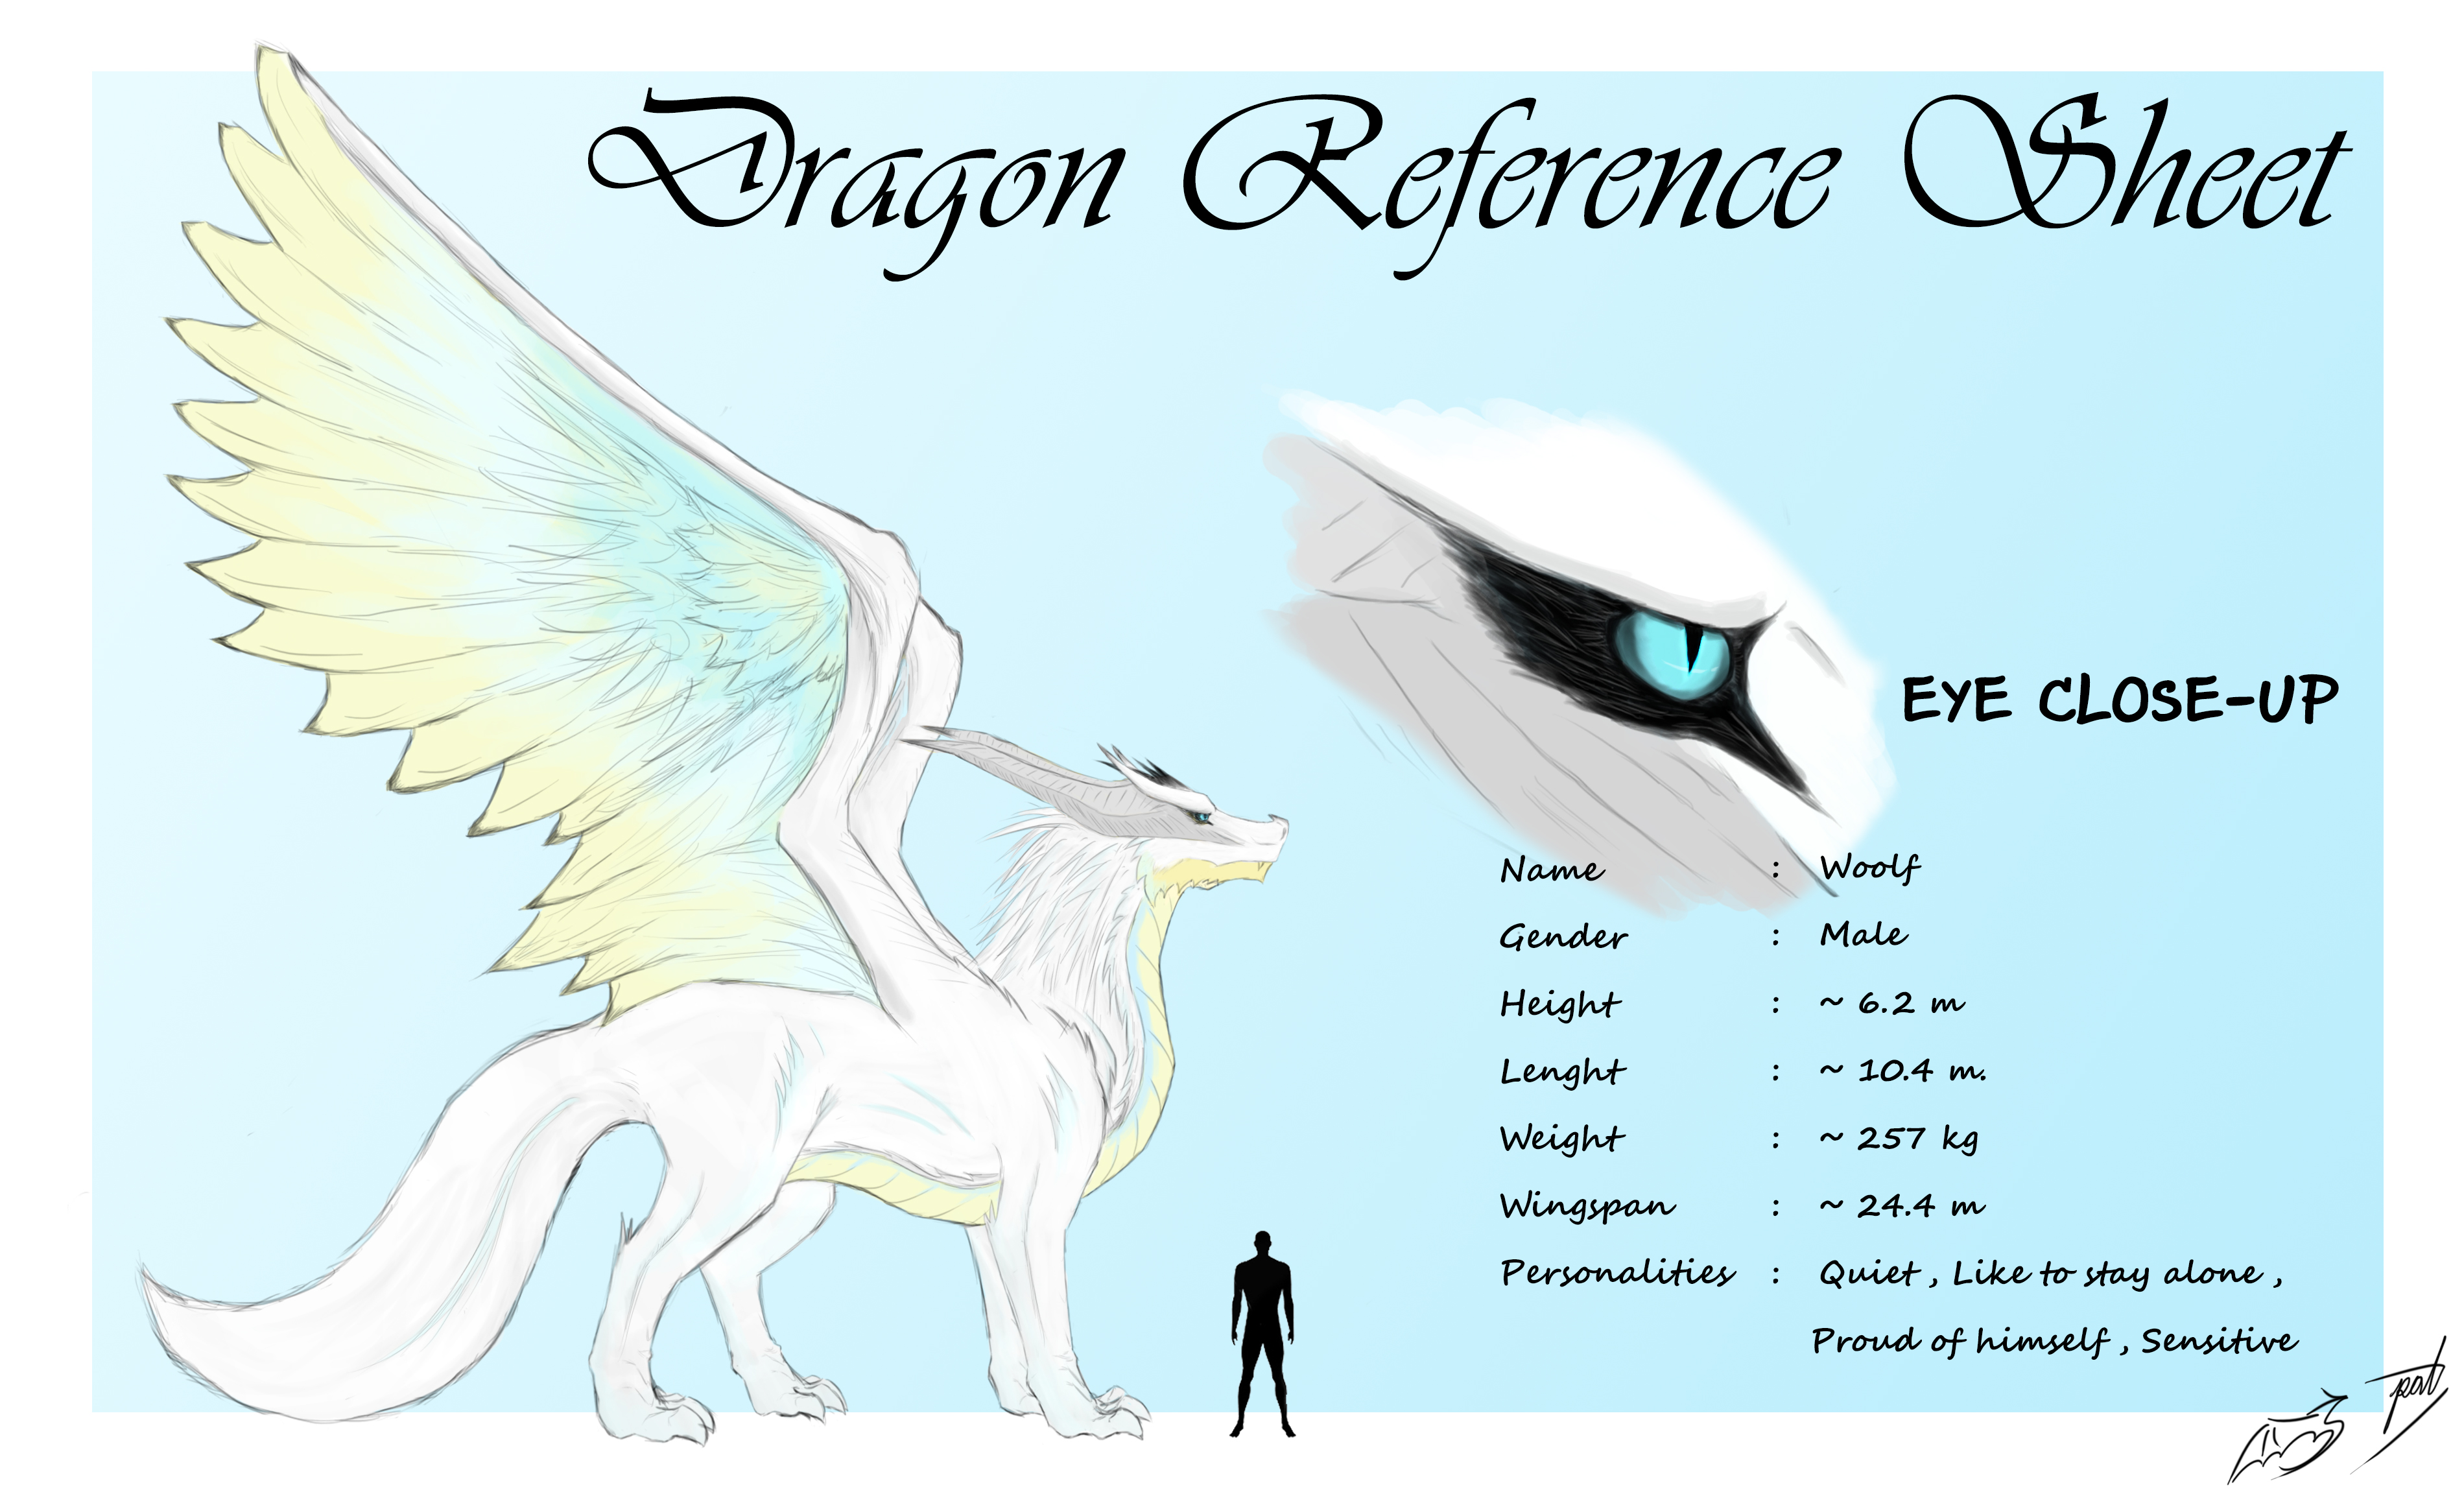 Woolf - Dragon Reference Sheet